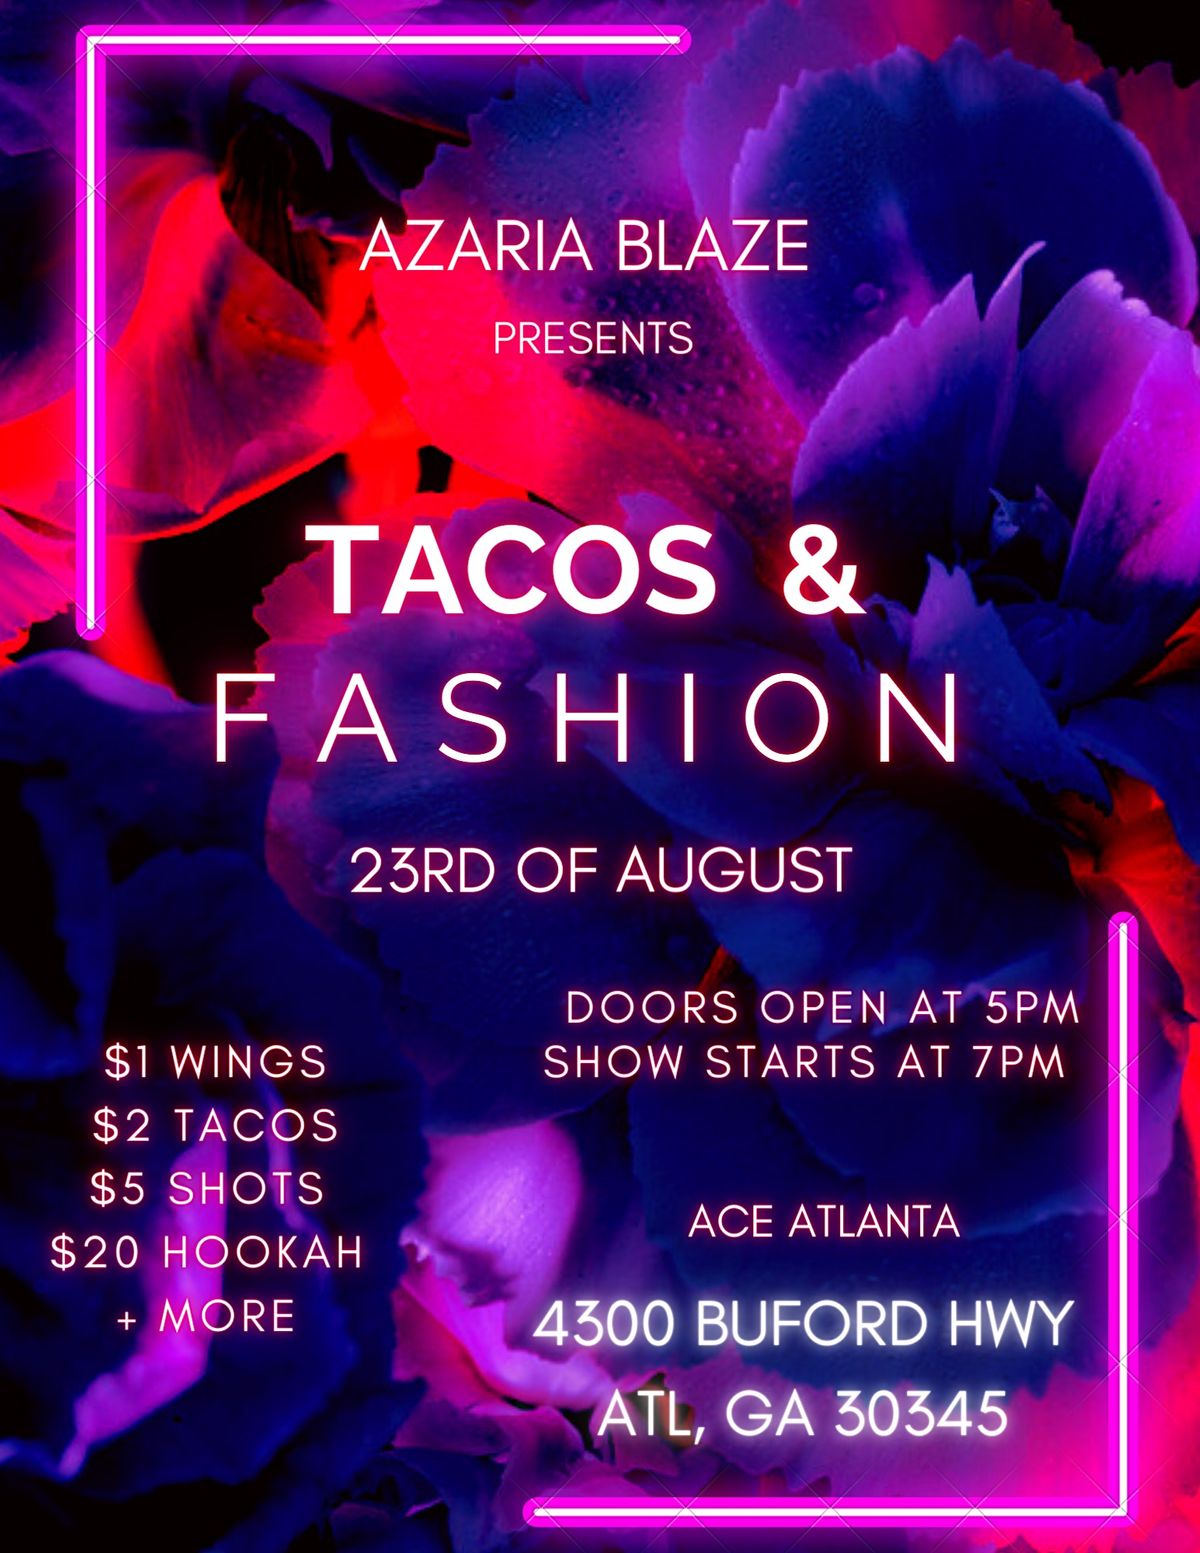 Tacos and Fashion